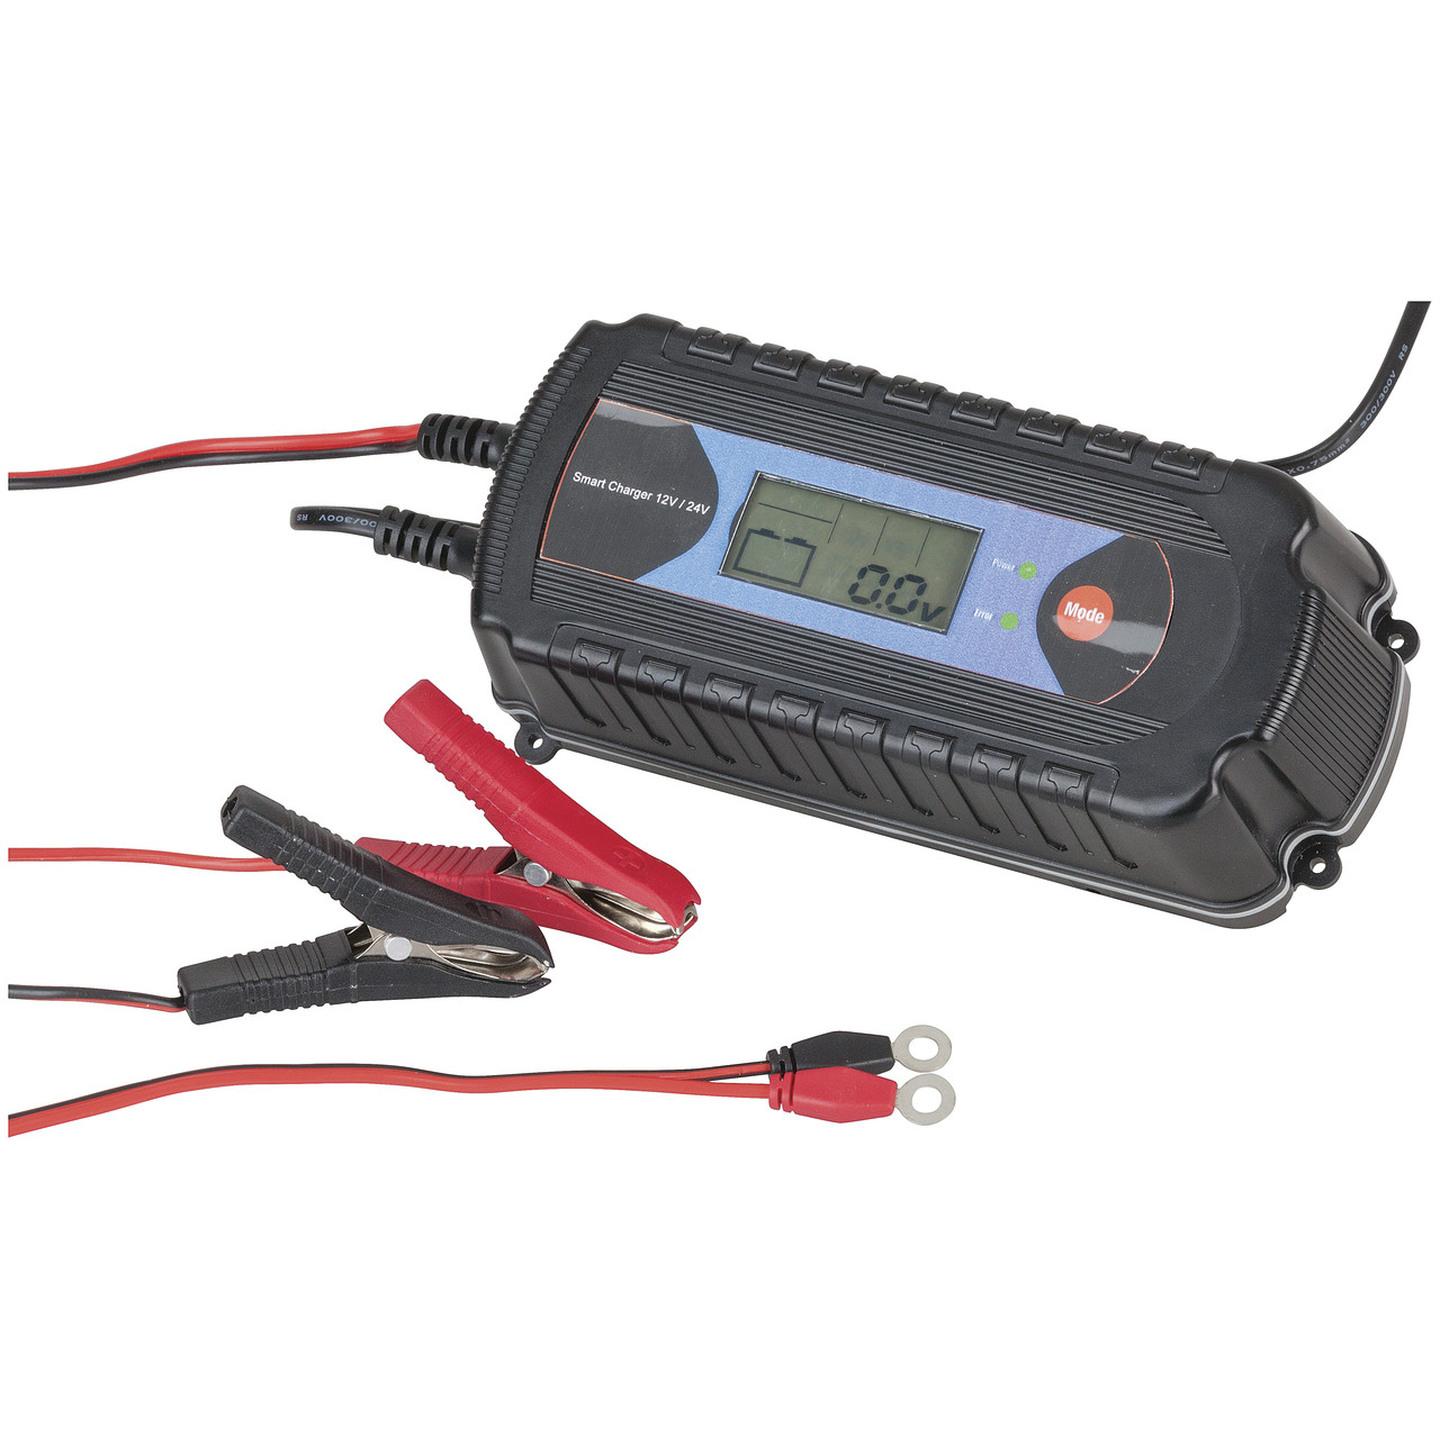 12V-7.2A/24V-3.6A 9 State Charger